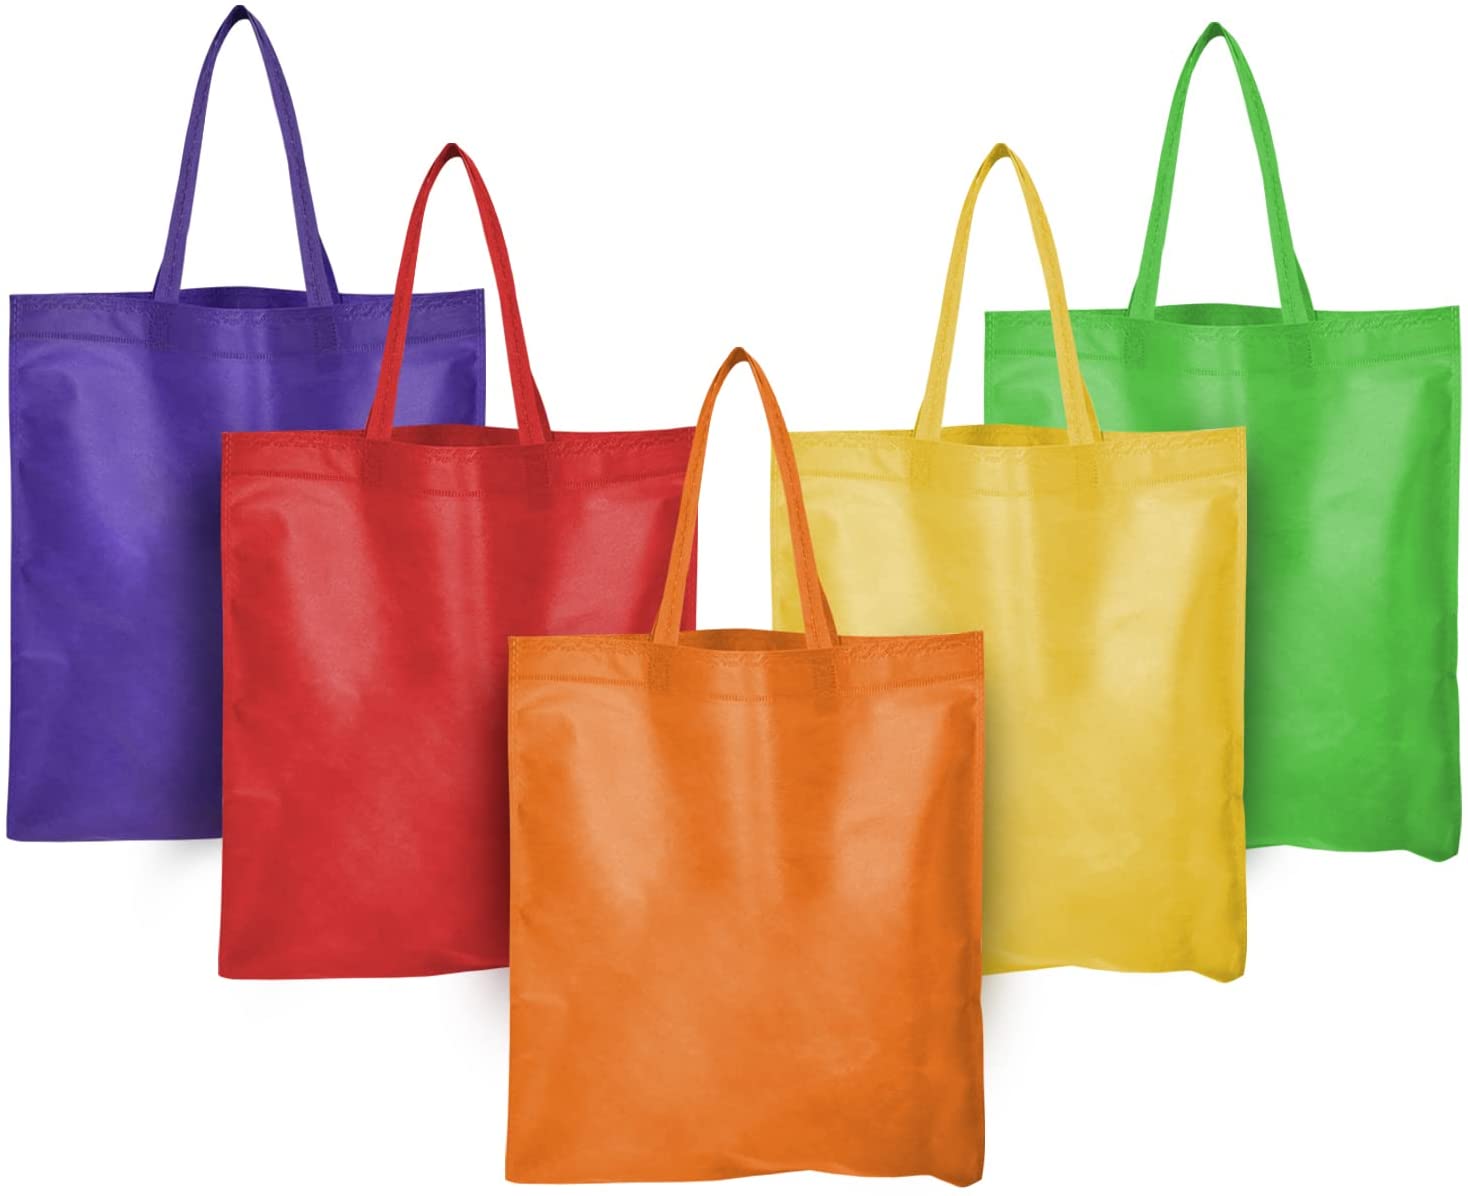 Wholesale Red Color Canvas Reusable Shopping Tote Bags in Bulk